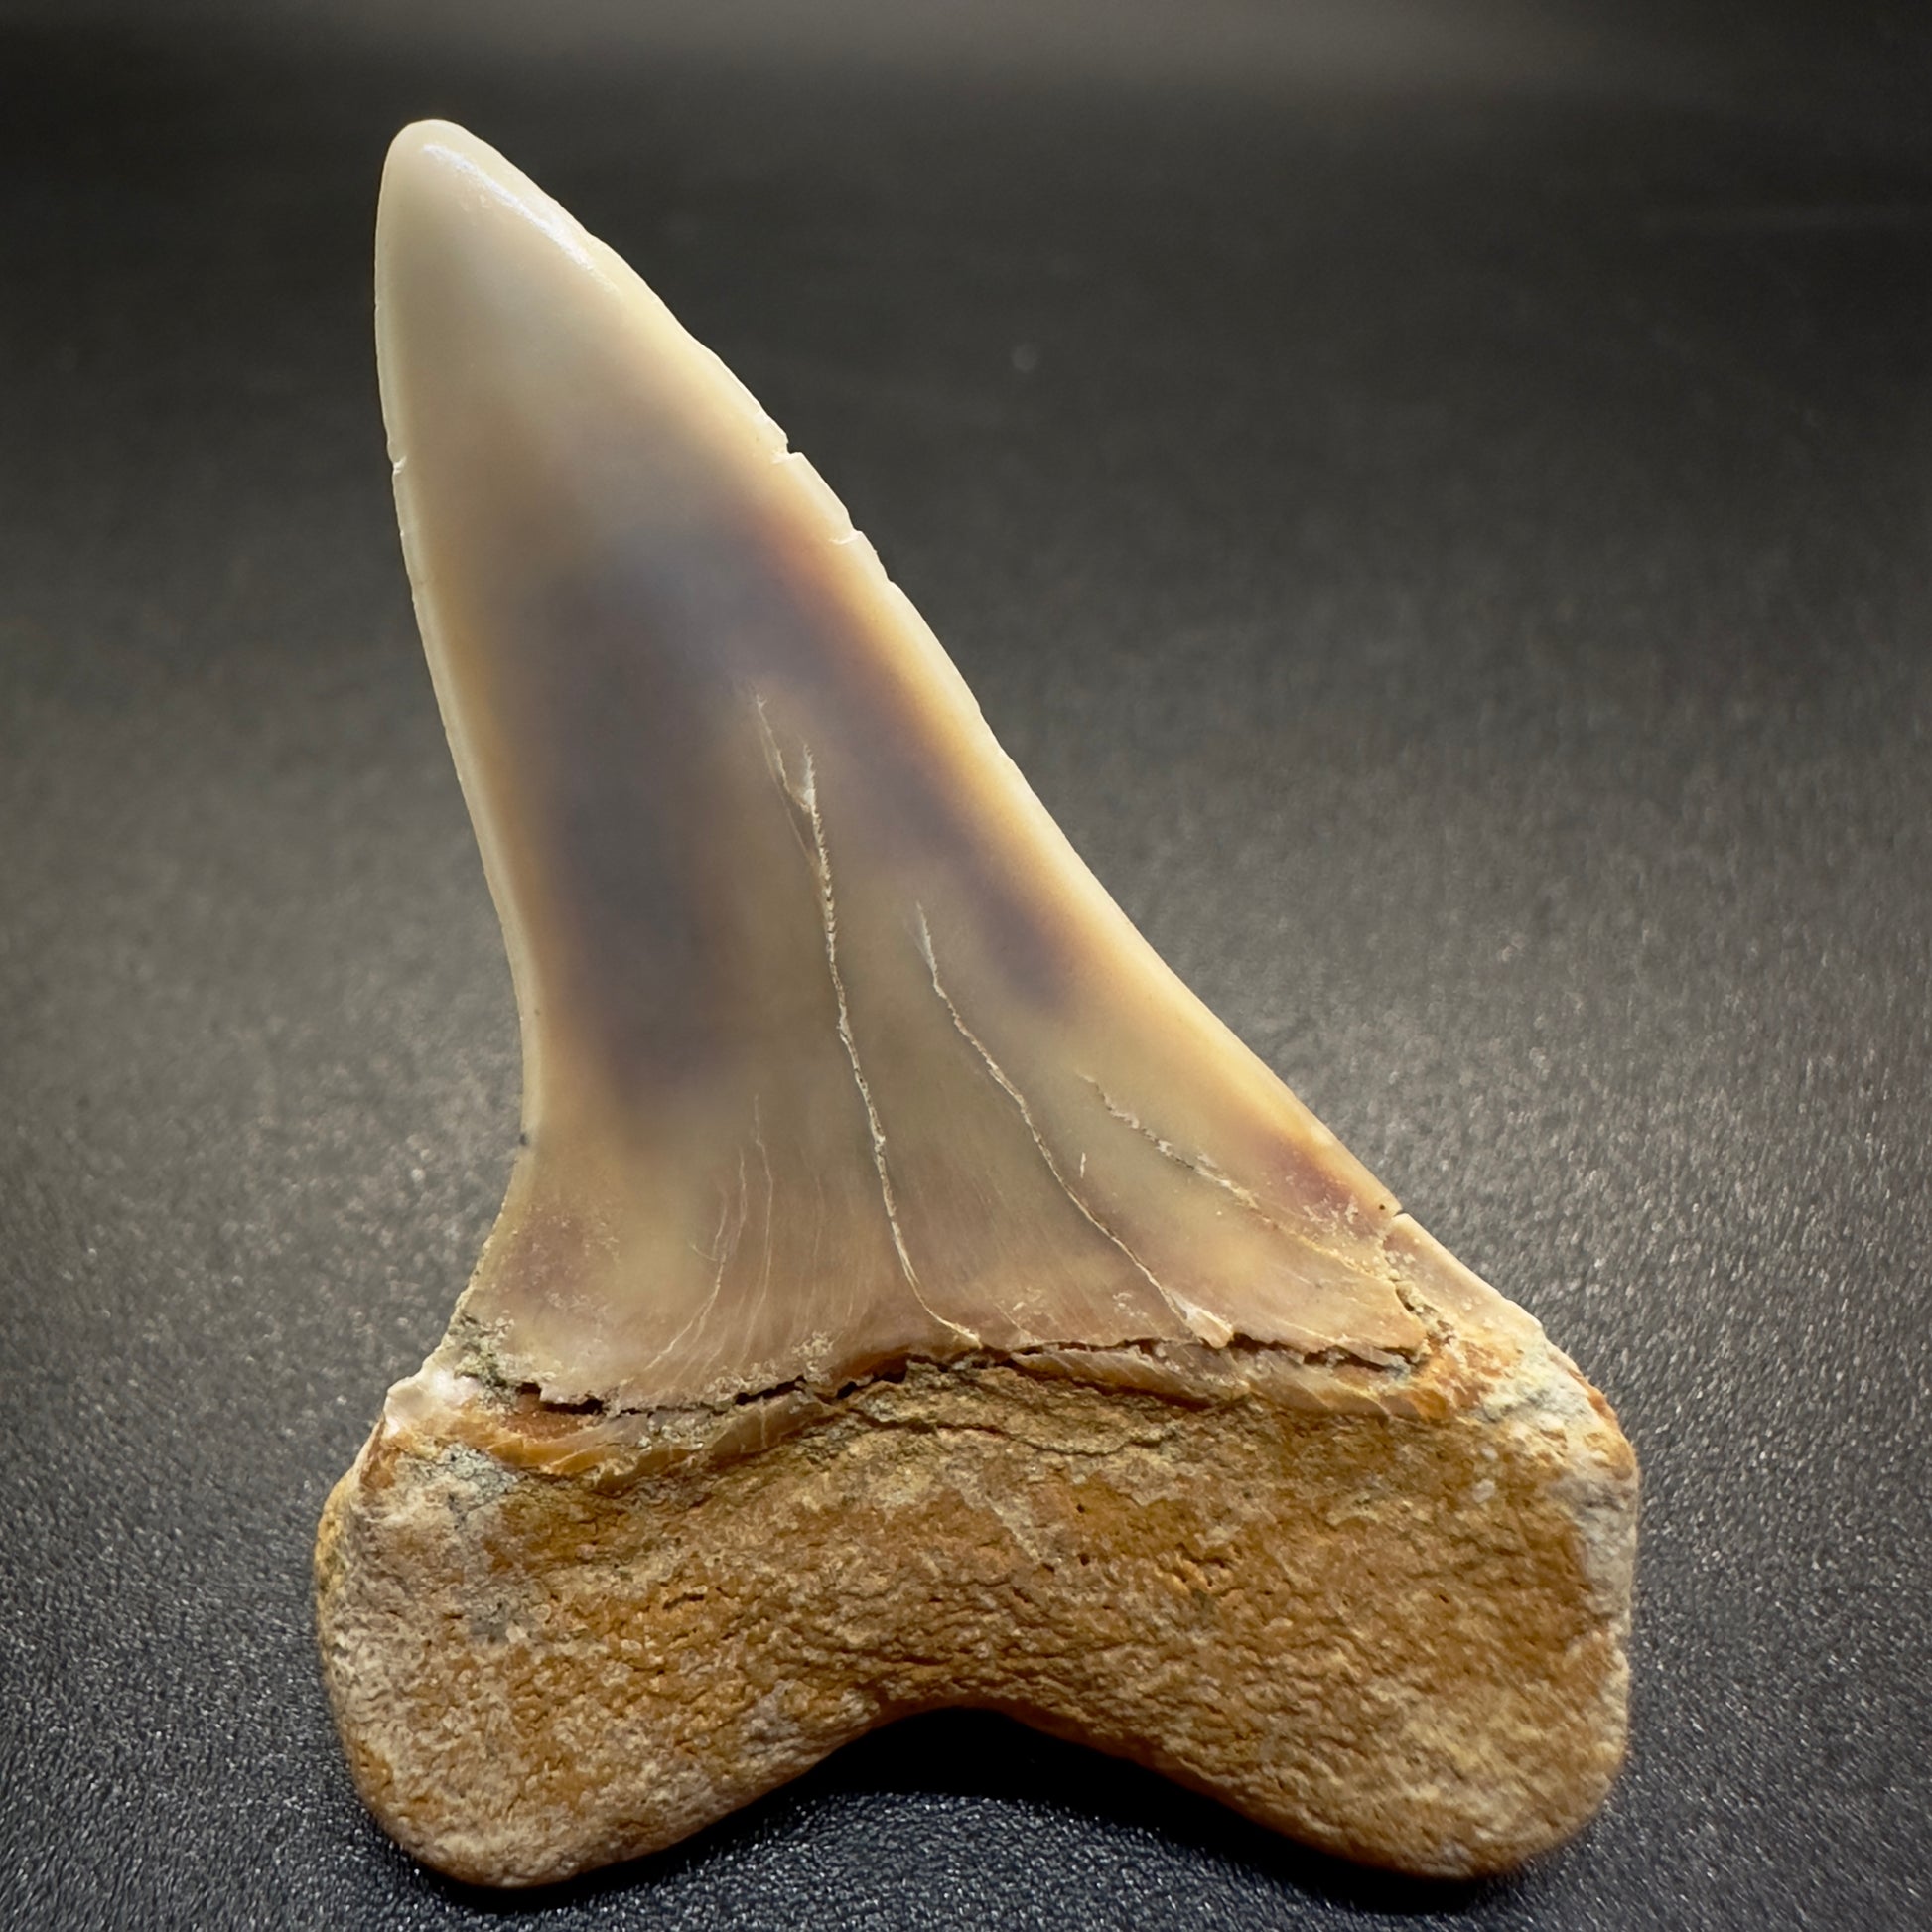 1.86 inches colorful Extinct Hooked-Tooth Mako - Isurus planus shark tooth from Bakersfield, California M503 back